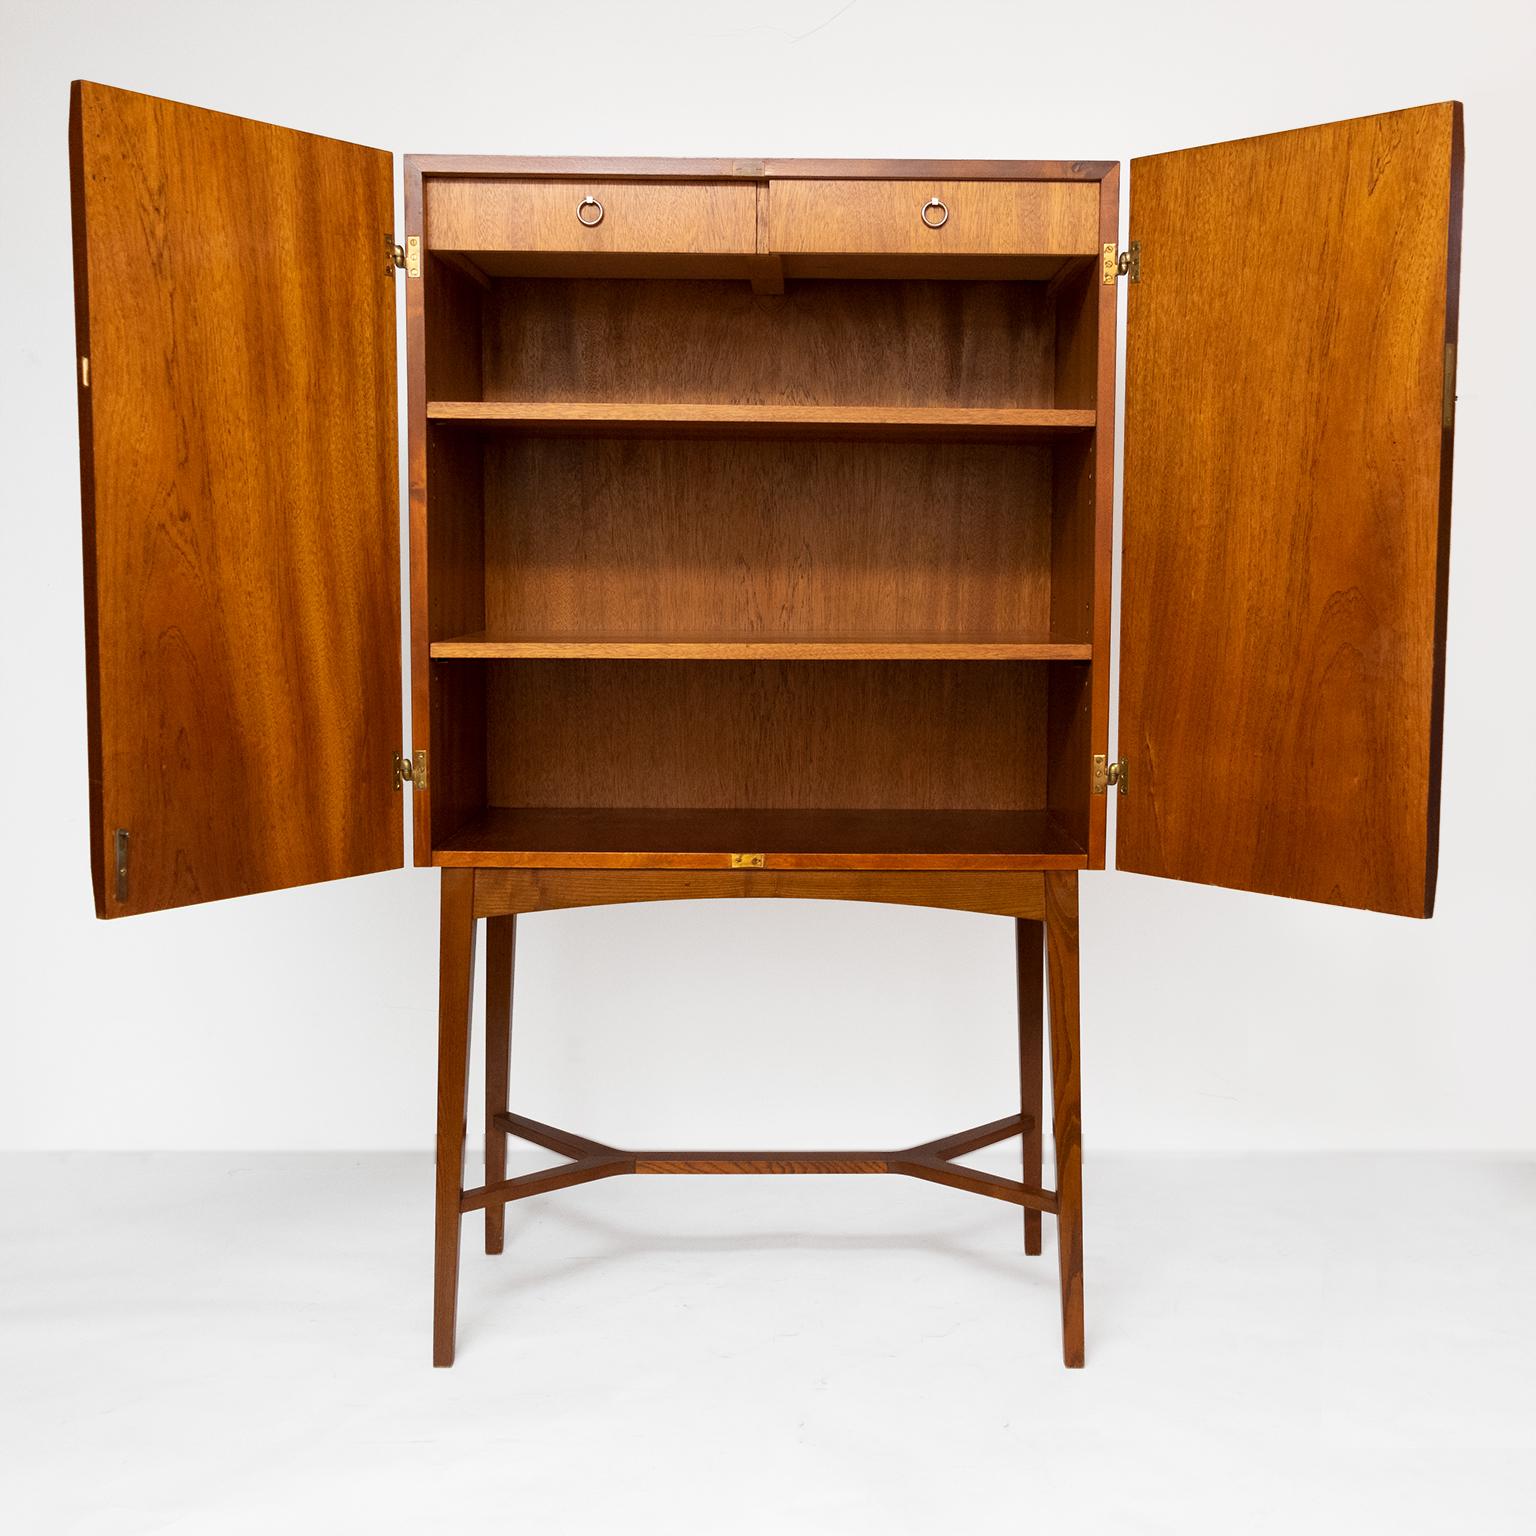 20th Century Scandinavian Modern Mahogany Cabinet with Double Parquetry Doors